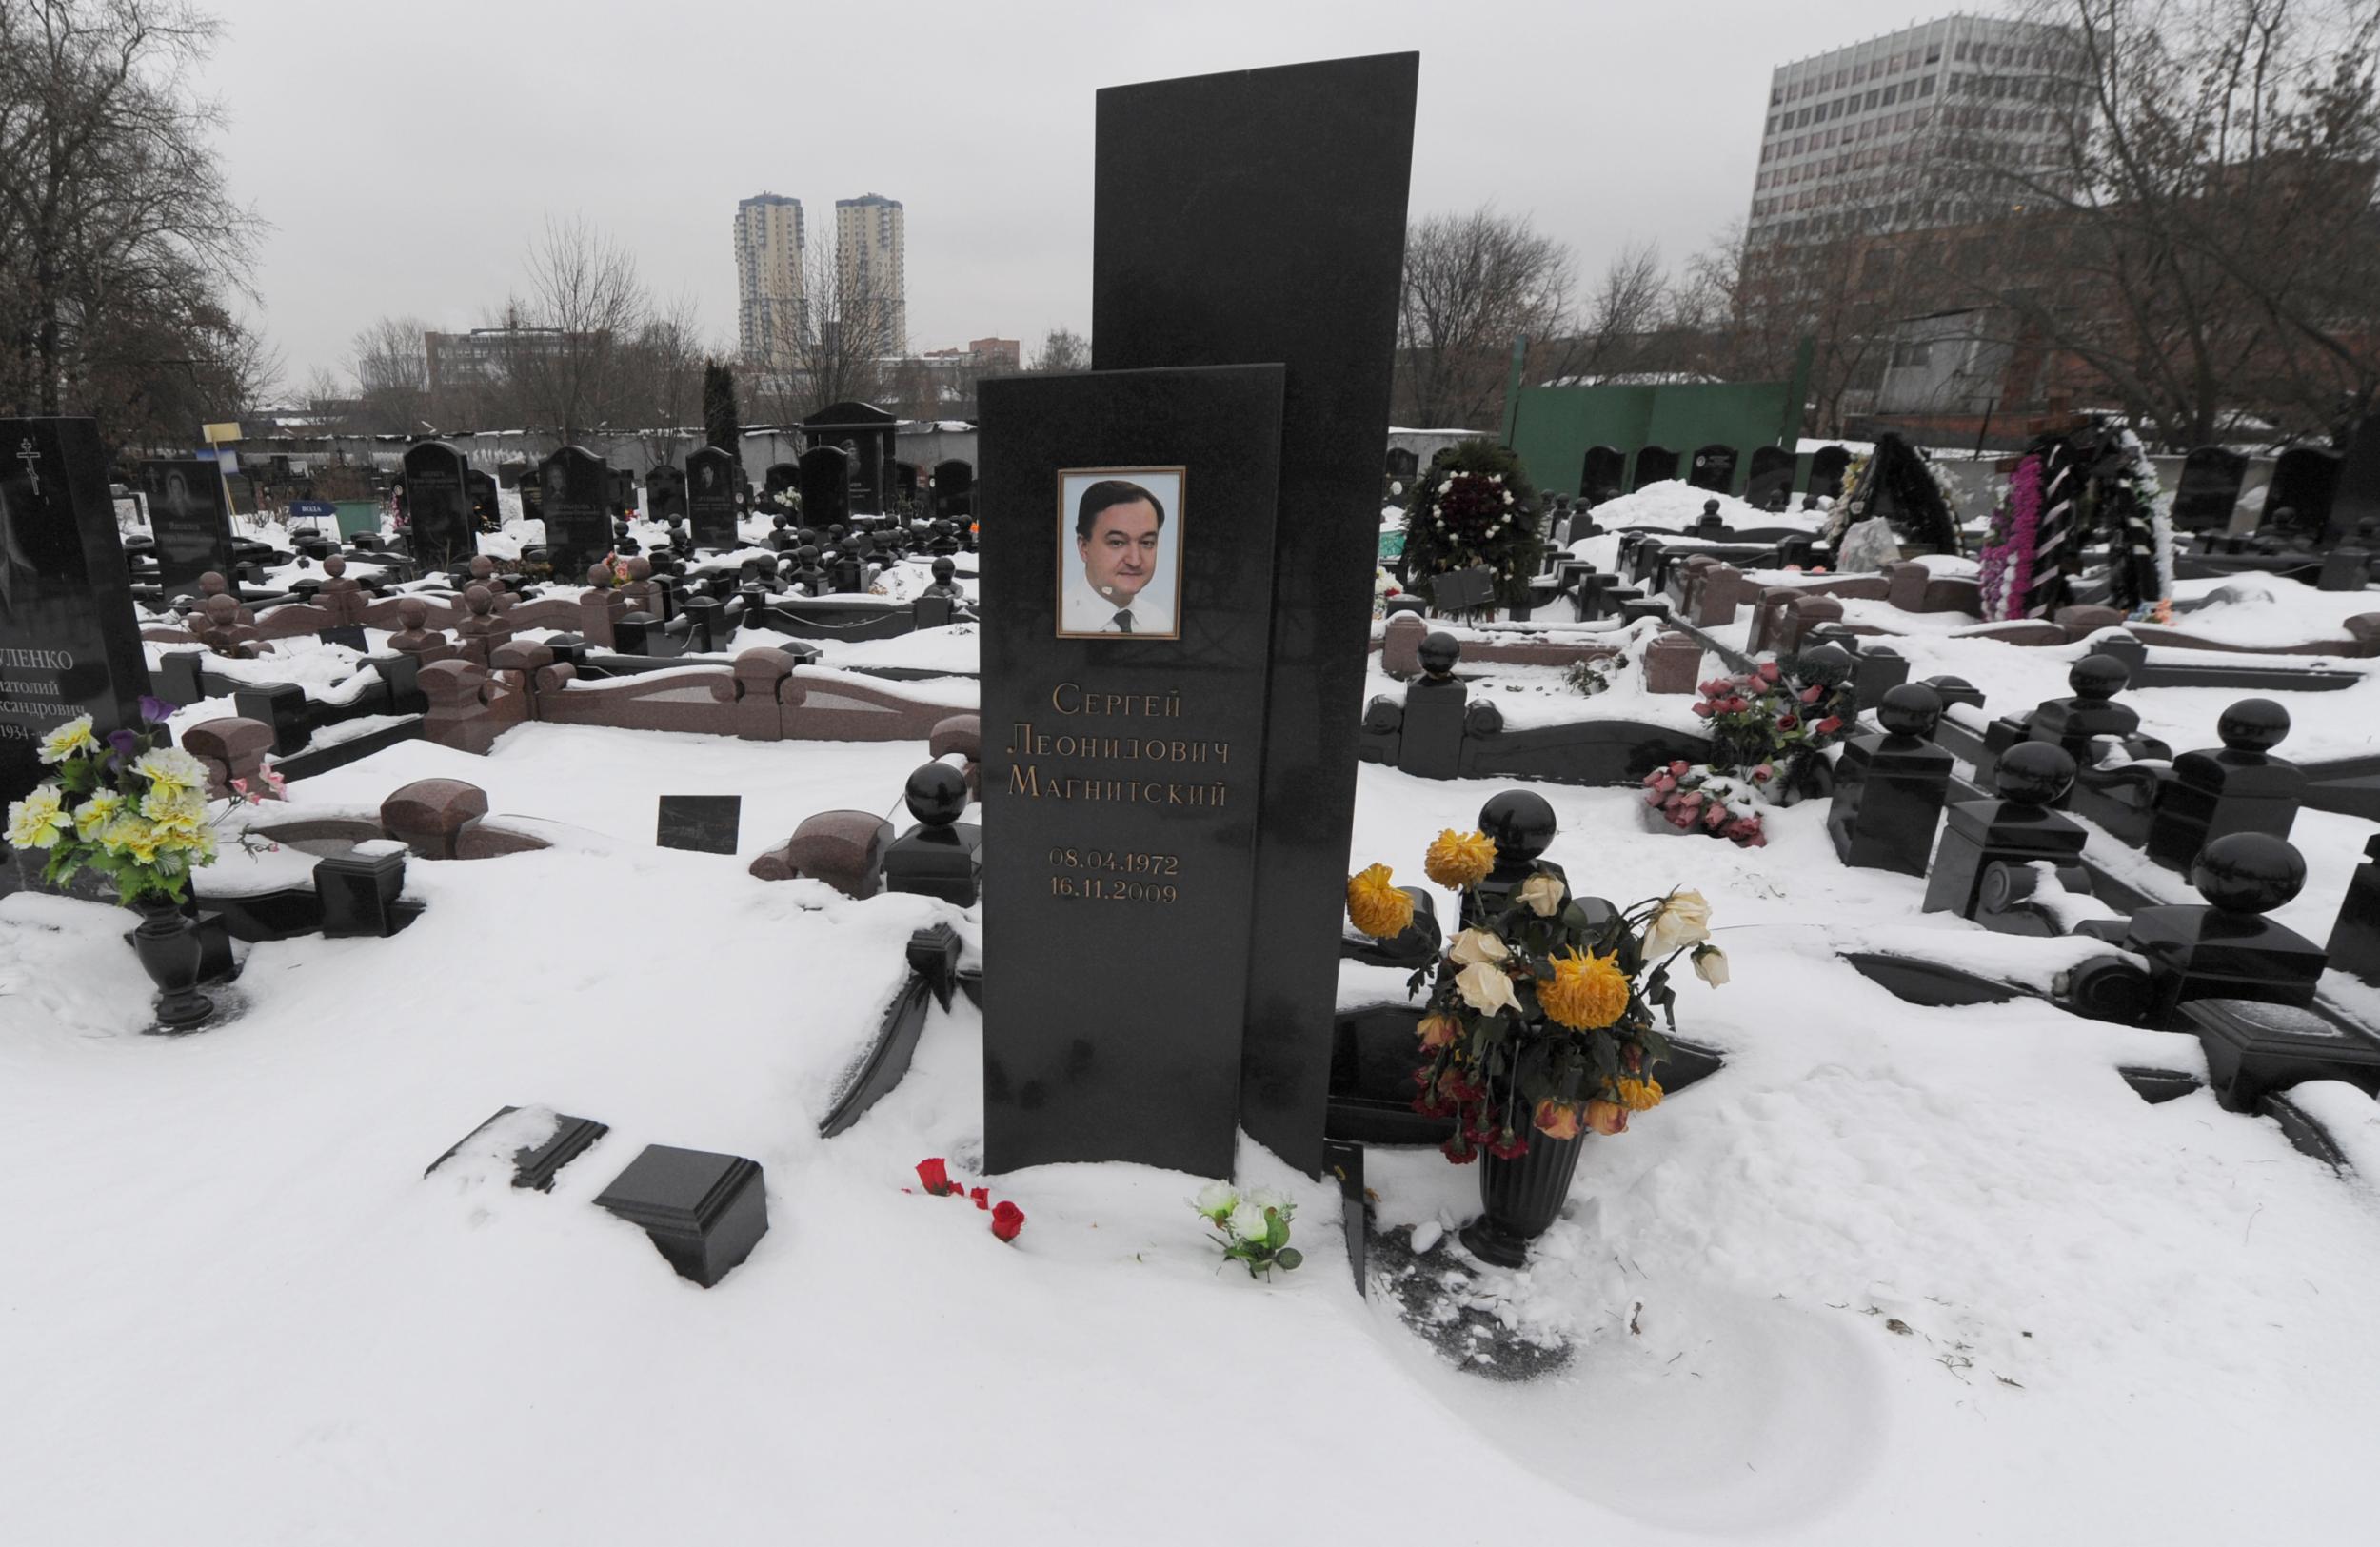 The grave of lawyer Sergei Magnitsky who died after exposing Russian corruption